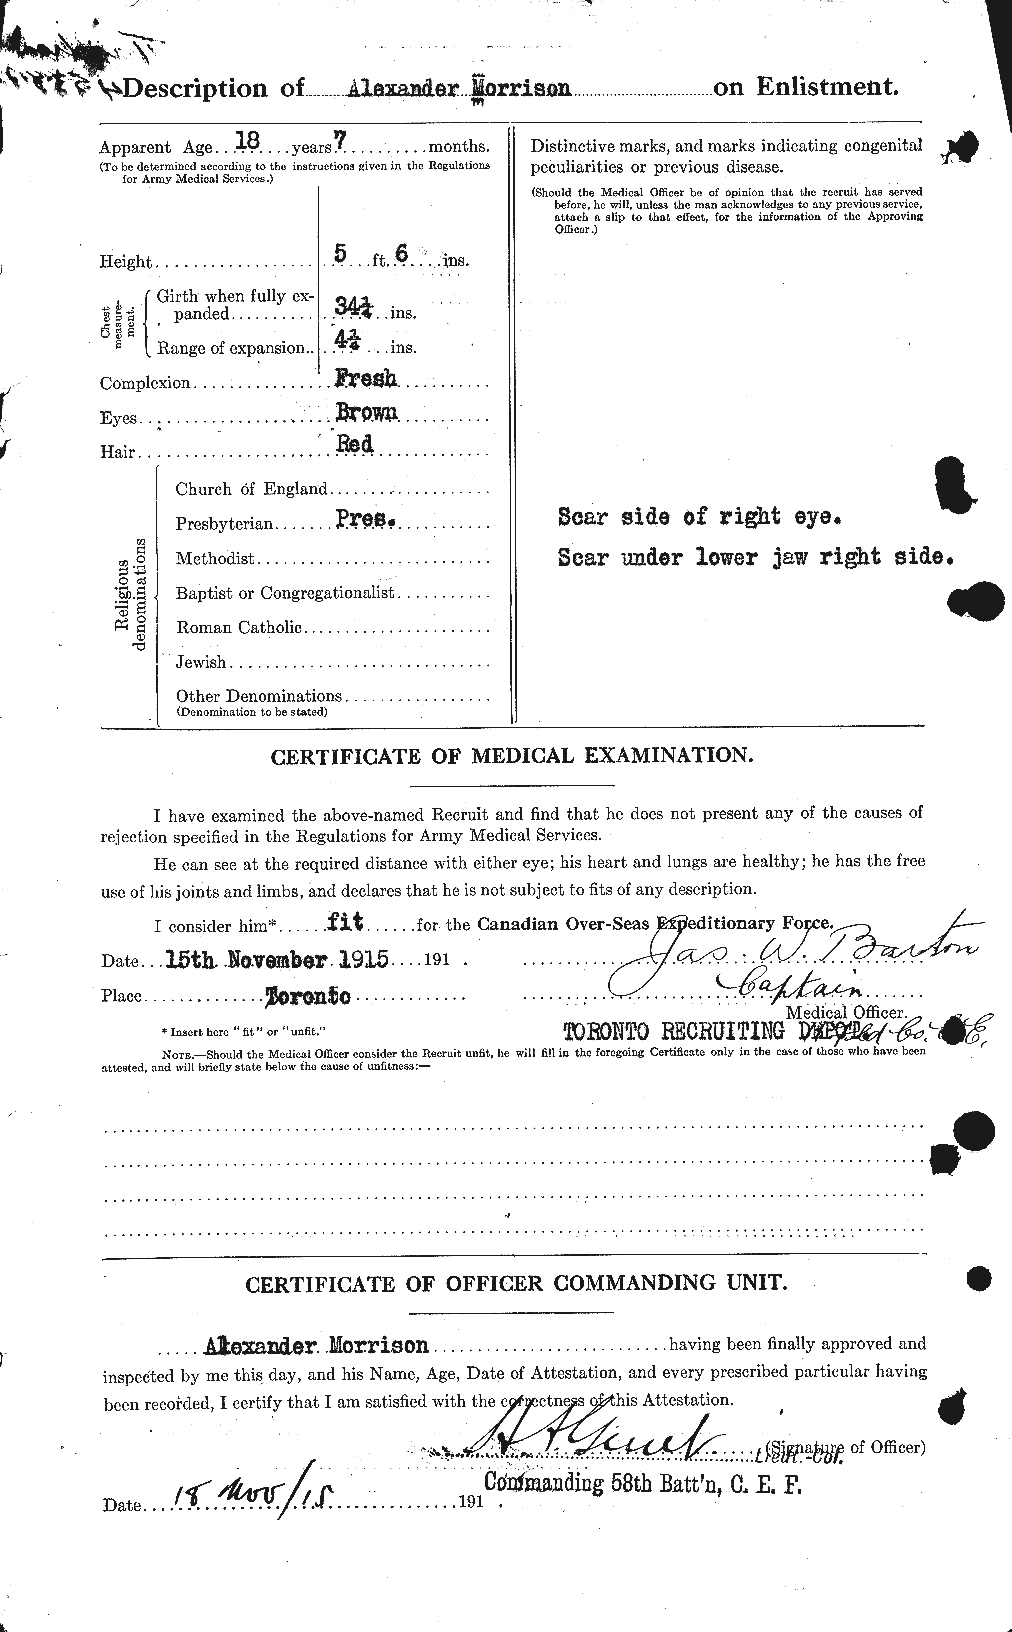 Personnel Records of the First World War - CEF 510994b